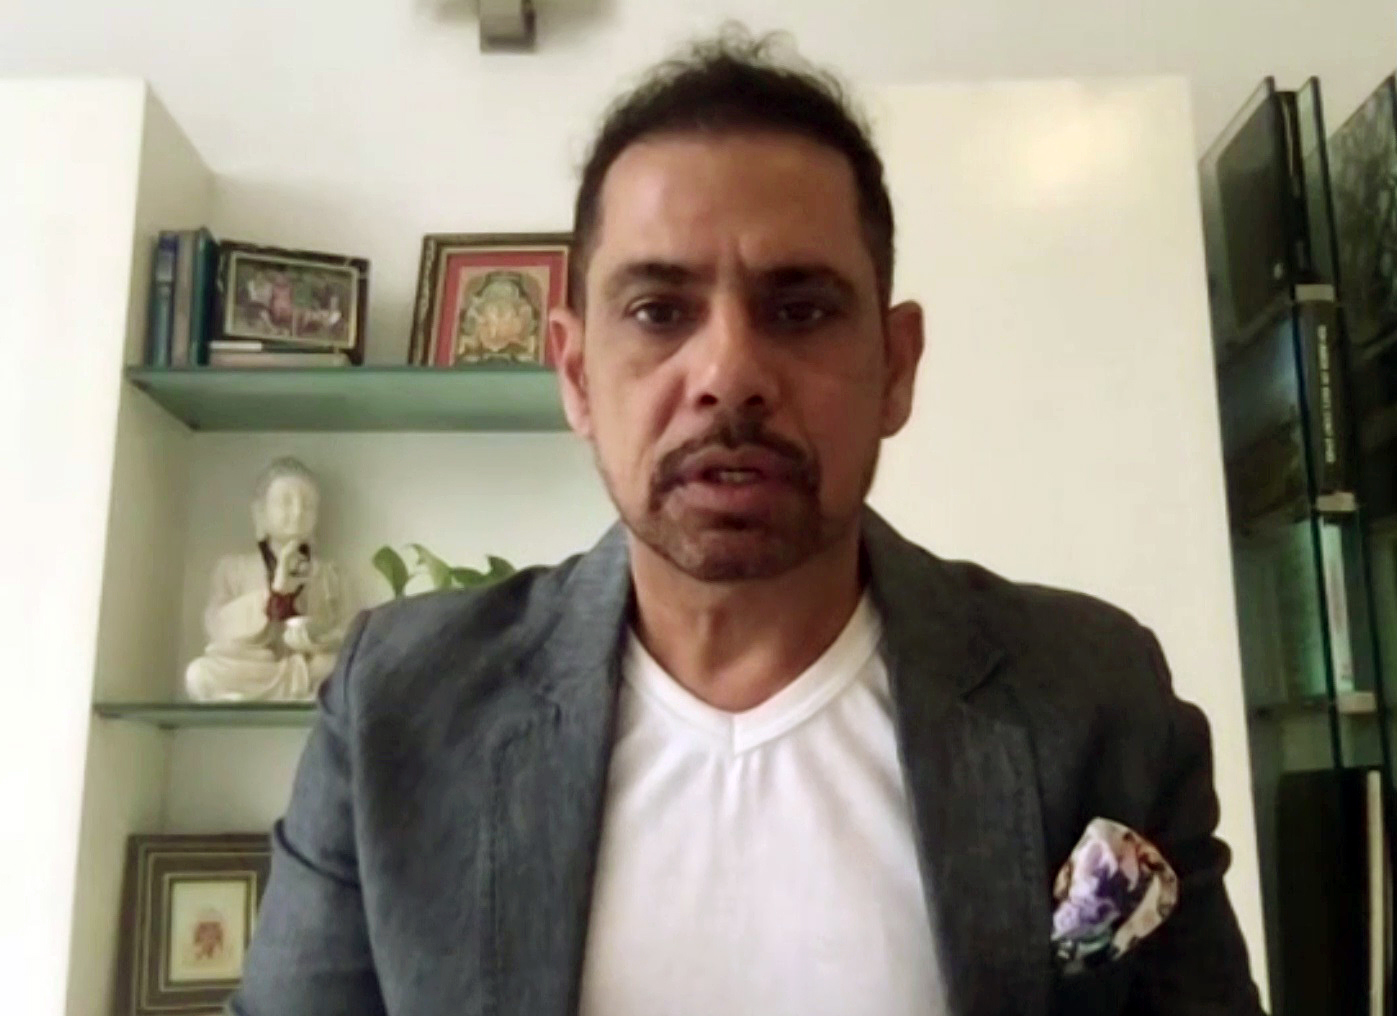 Robert Vadra under-reported his income of Rs 106 crore over 11 years, alleges I-T